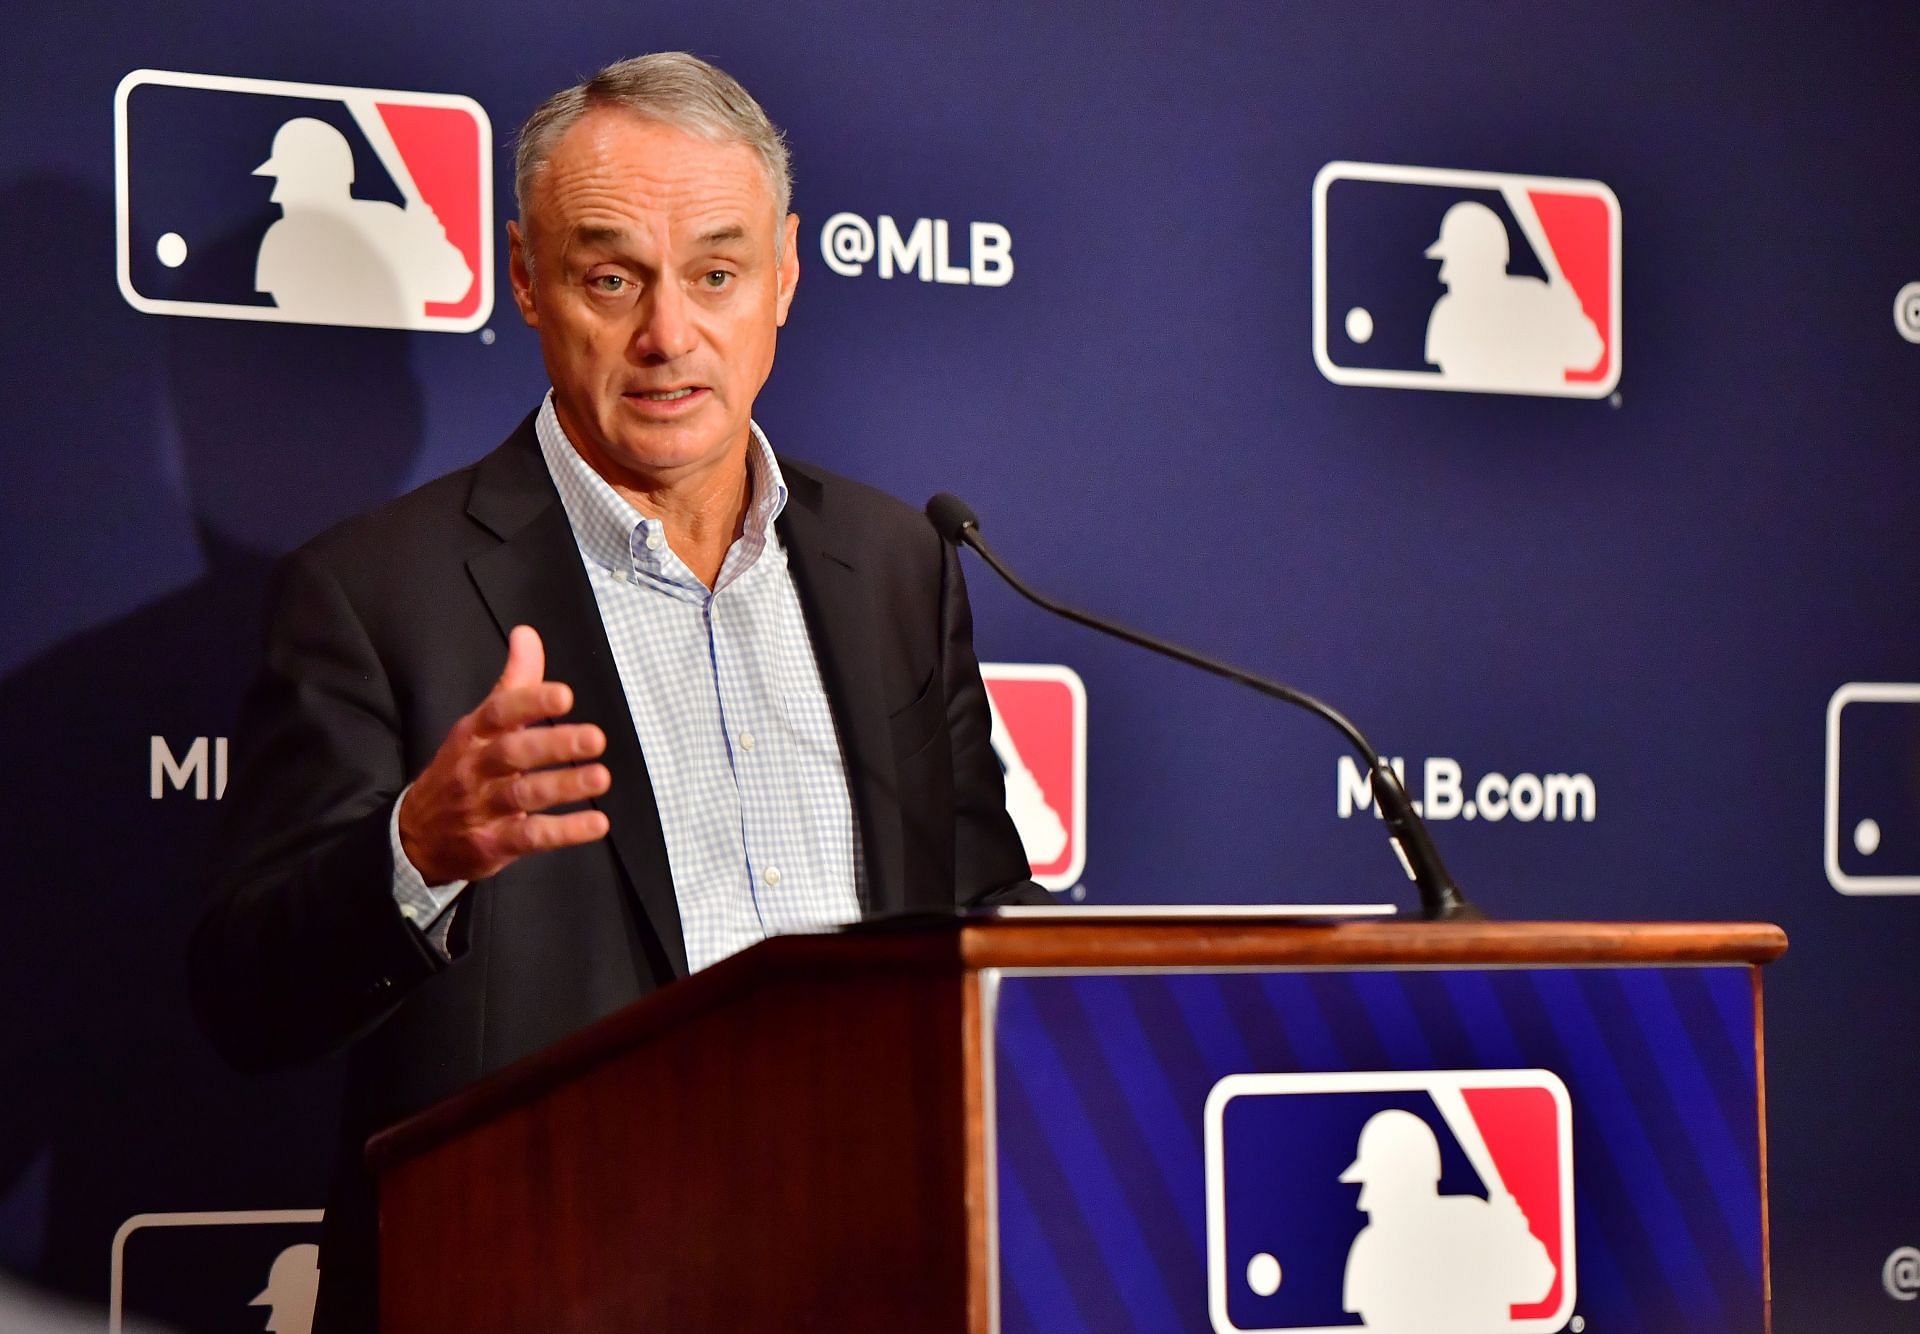 New Divisions if MLB Expands to 32 Teams. Thoughts? : r/mlb